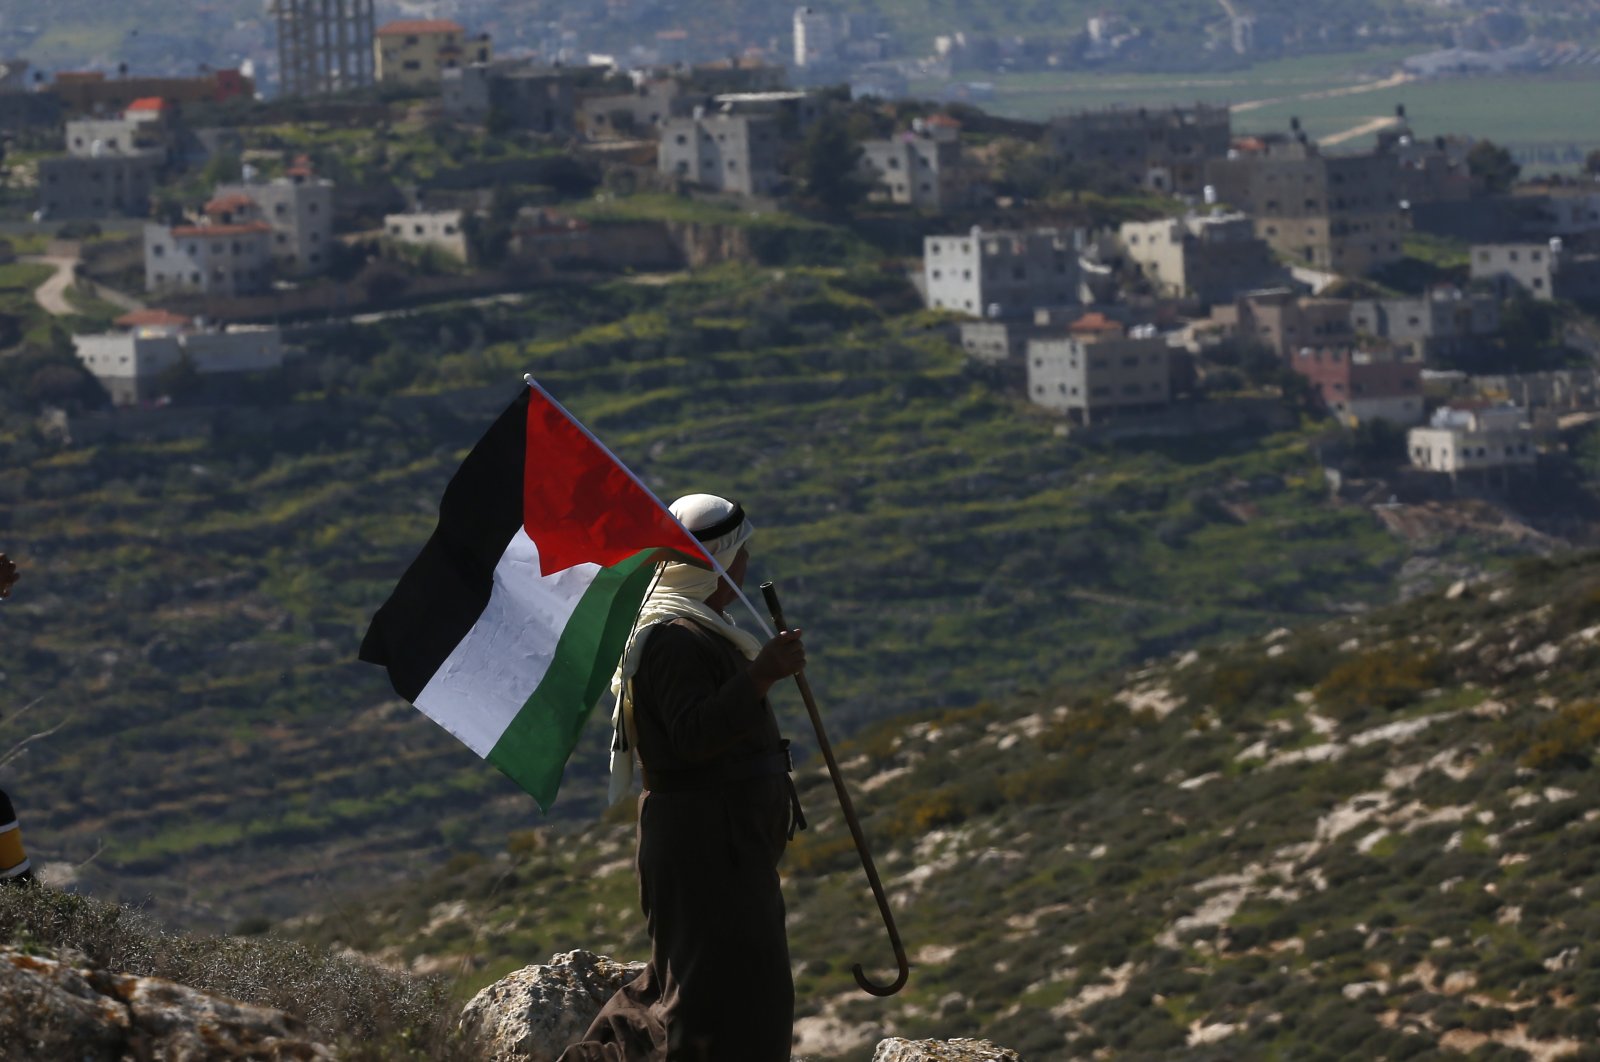 A Palestinian man waves the Palestine flag during a demonstration against Israel's settlements in the village of Bet Dajan near the northern West Bank city of Nablus, Feb. 26, 2021. (EPA File Photo)